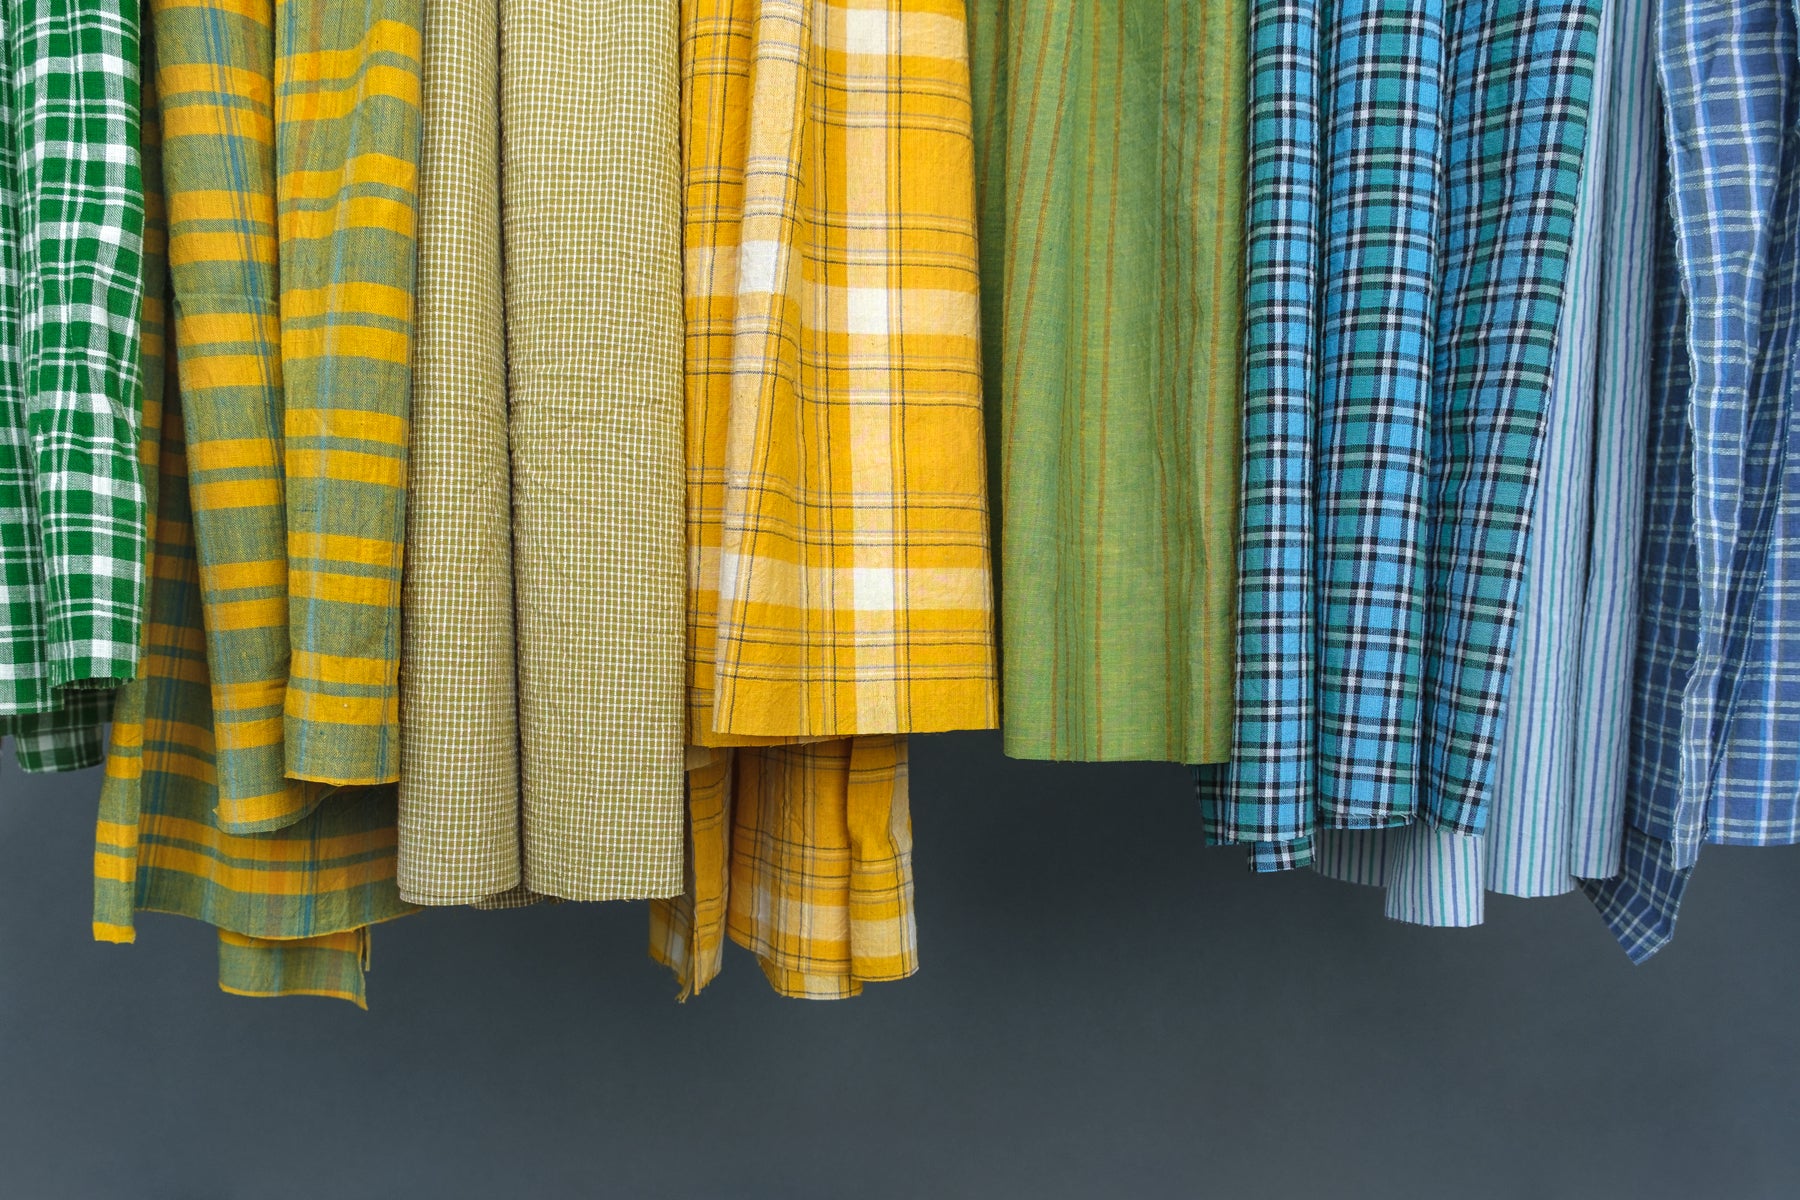 LEARN ABOUT OUR HANDWOVEN COTTON FABRICS